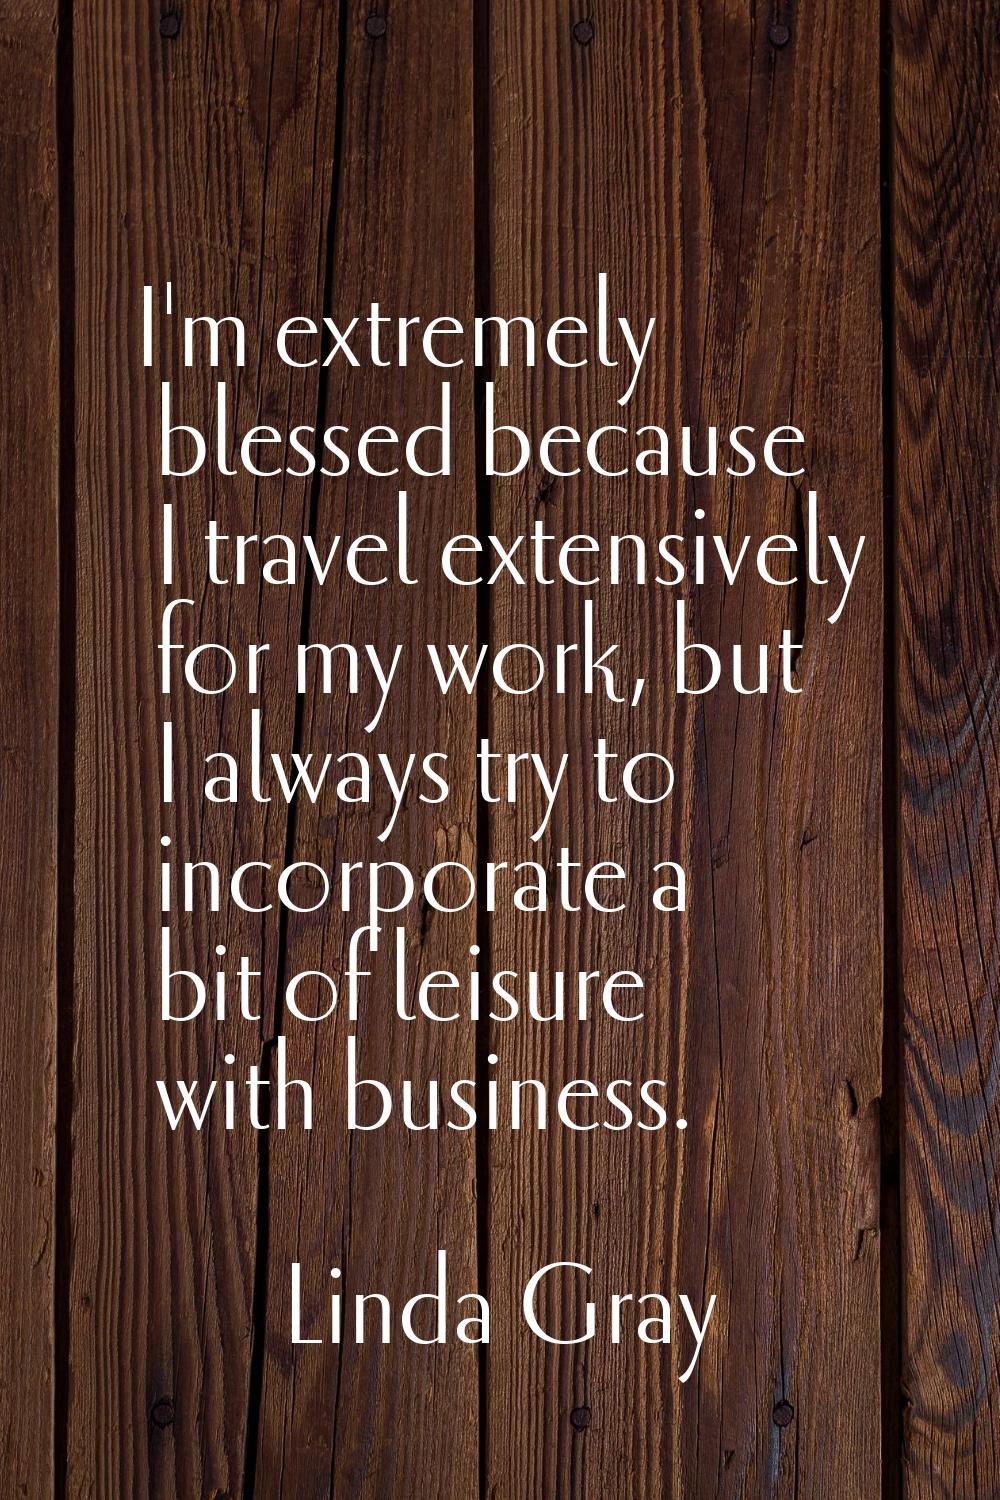 I'm extremely blessed because I travel extensively for my work, but I always try to incorporate a b